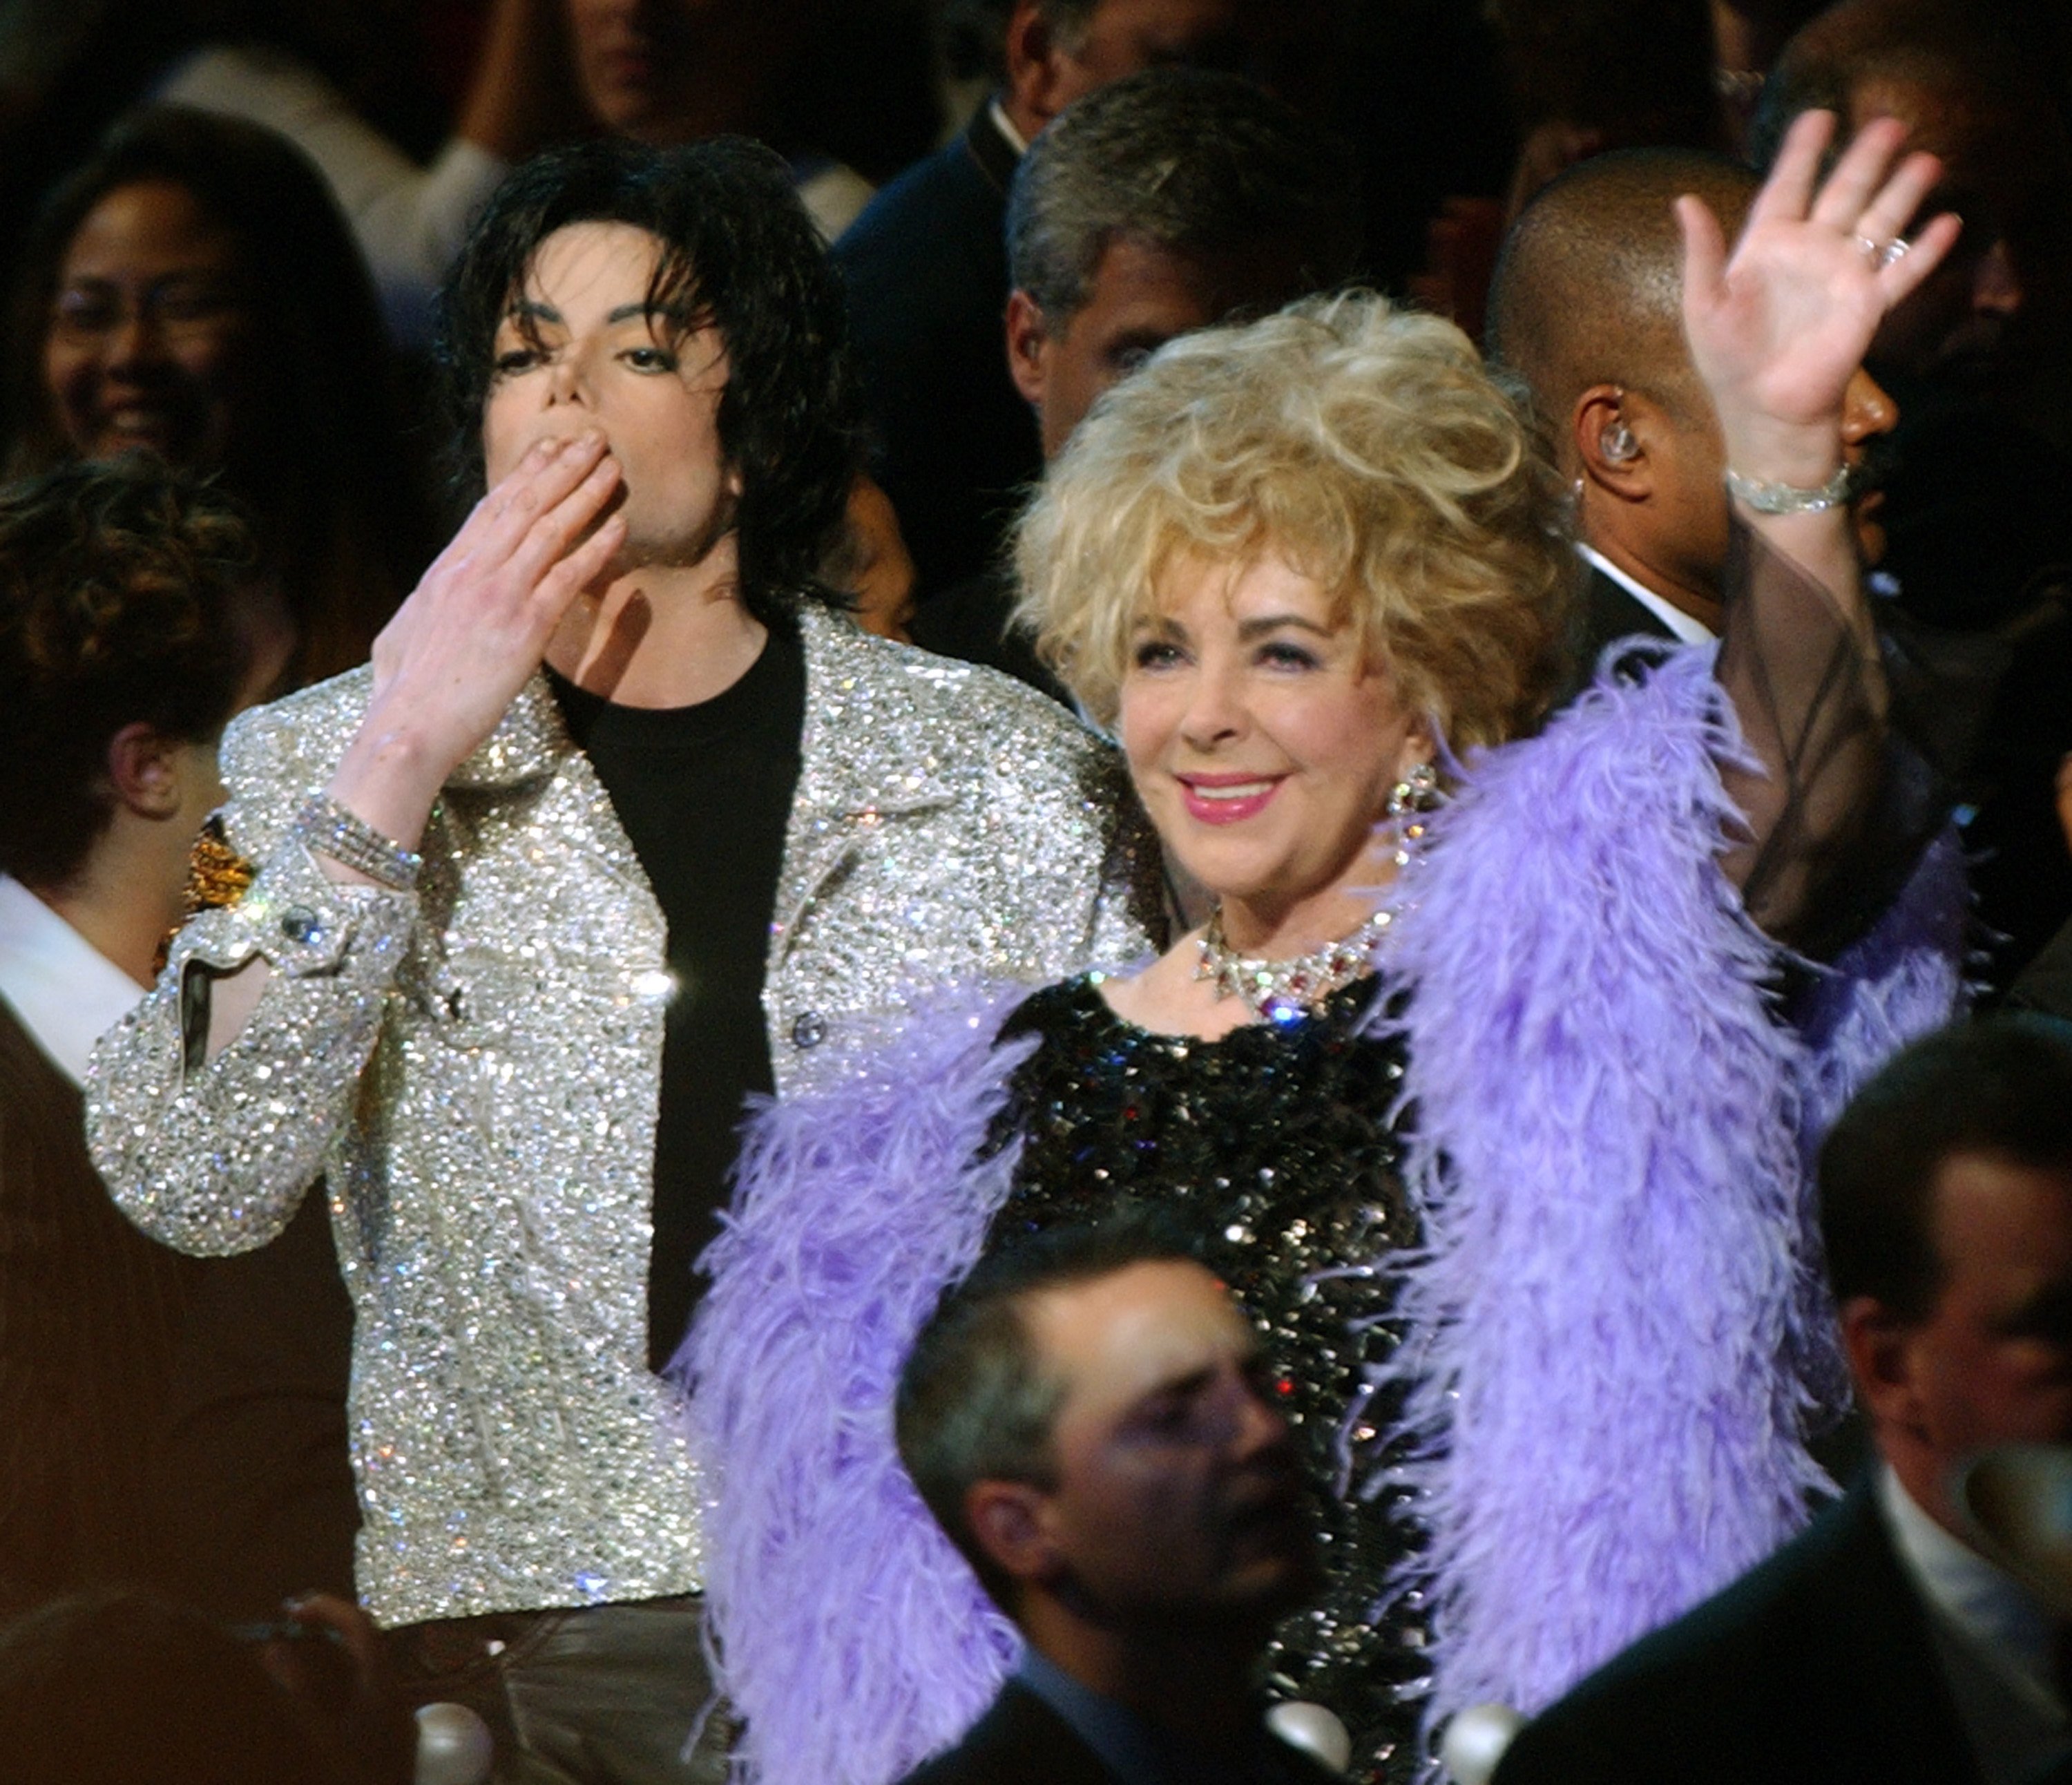 Michael Jackson and Elizabeth Taylor at Michael Jackson's 30th Anniversary Celebration | Source: Getty Images